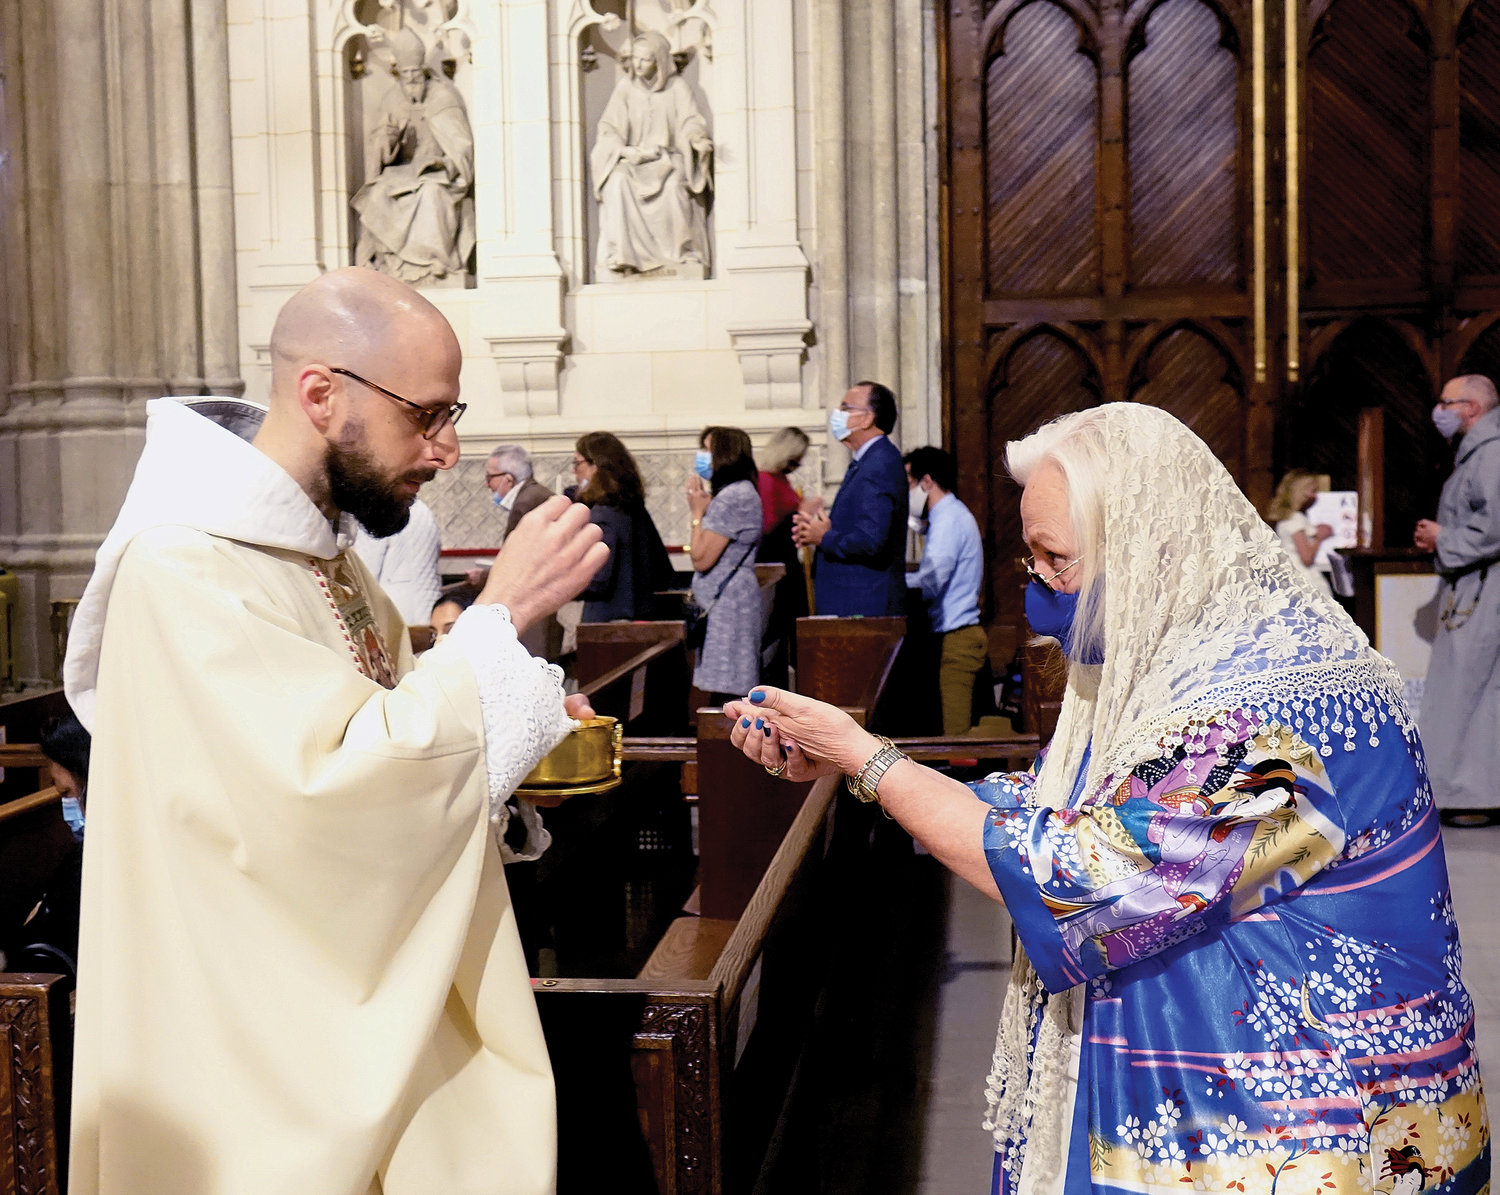 Father Frantisek Marie Chloupek, C.F.R., distributes Communion during the Mass of Ordination May 29 at St. Patrick’s Cathedral.